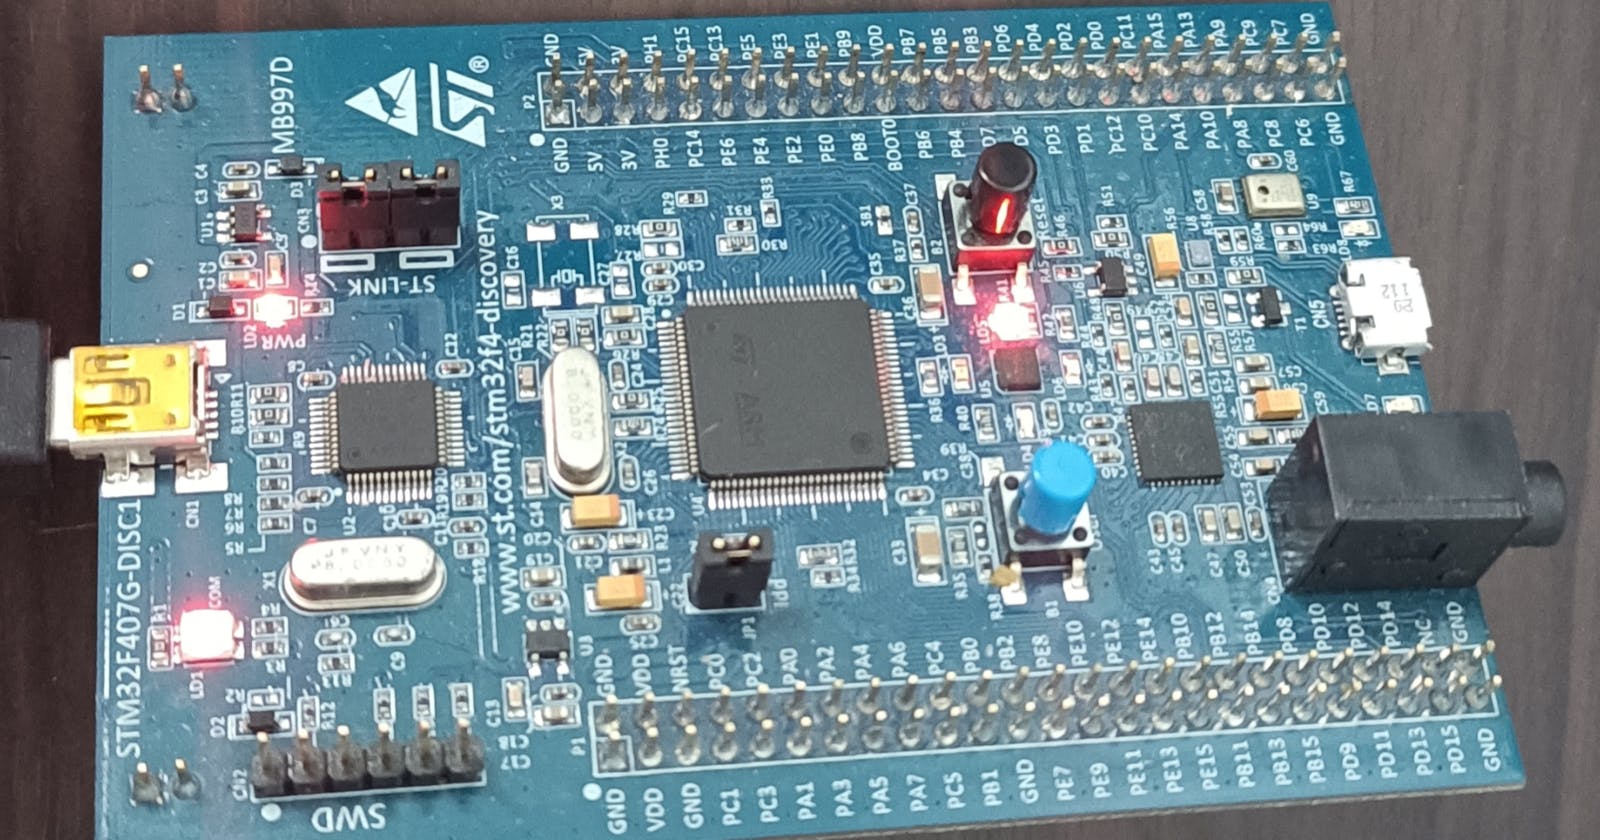 Interfacing LIS302DL Accelerometer using the SPI Protocol with the STM32F407VG-DISC1 Development Kit